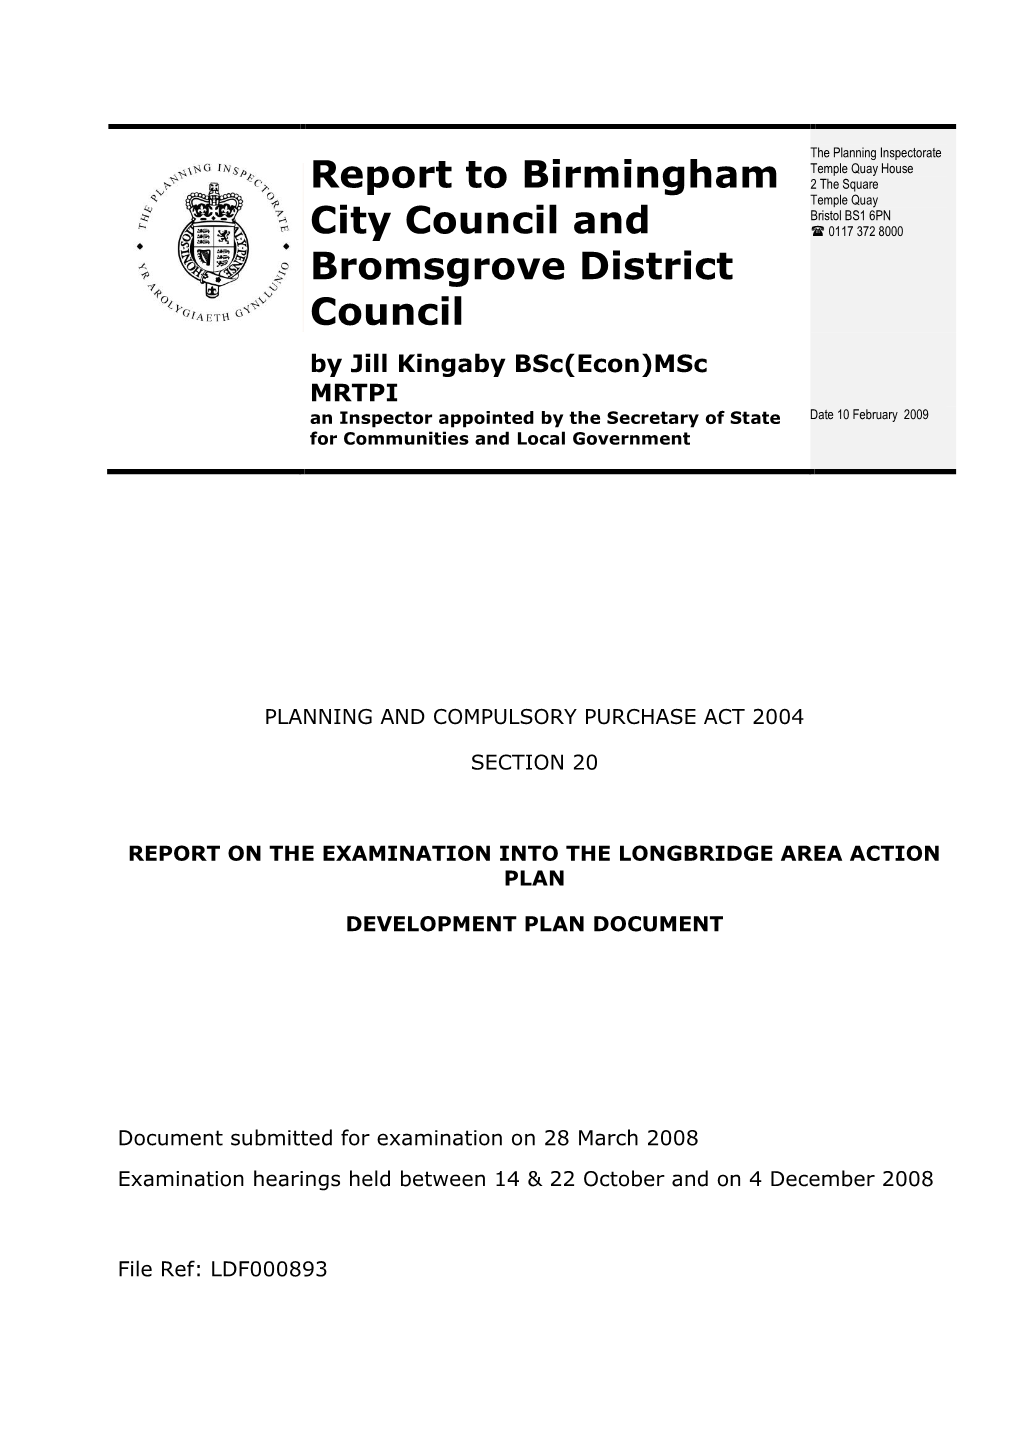 Report to Birmingham City Council and Bromsgrove District Council